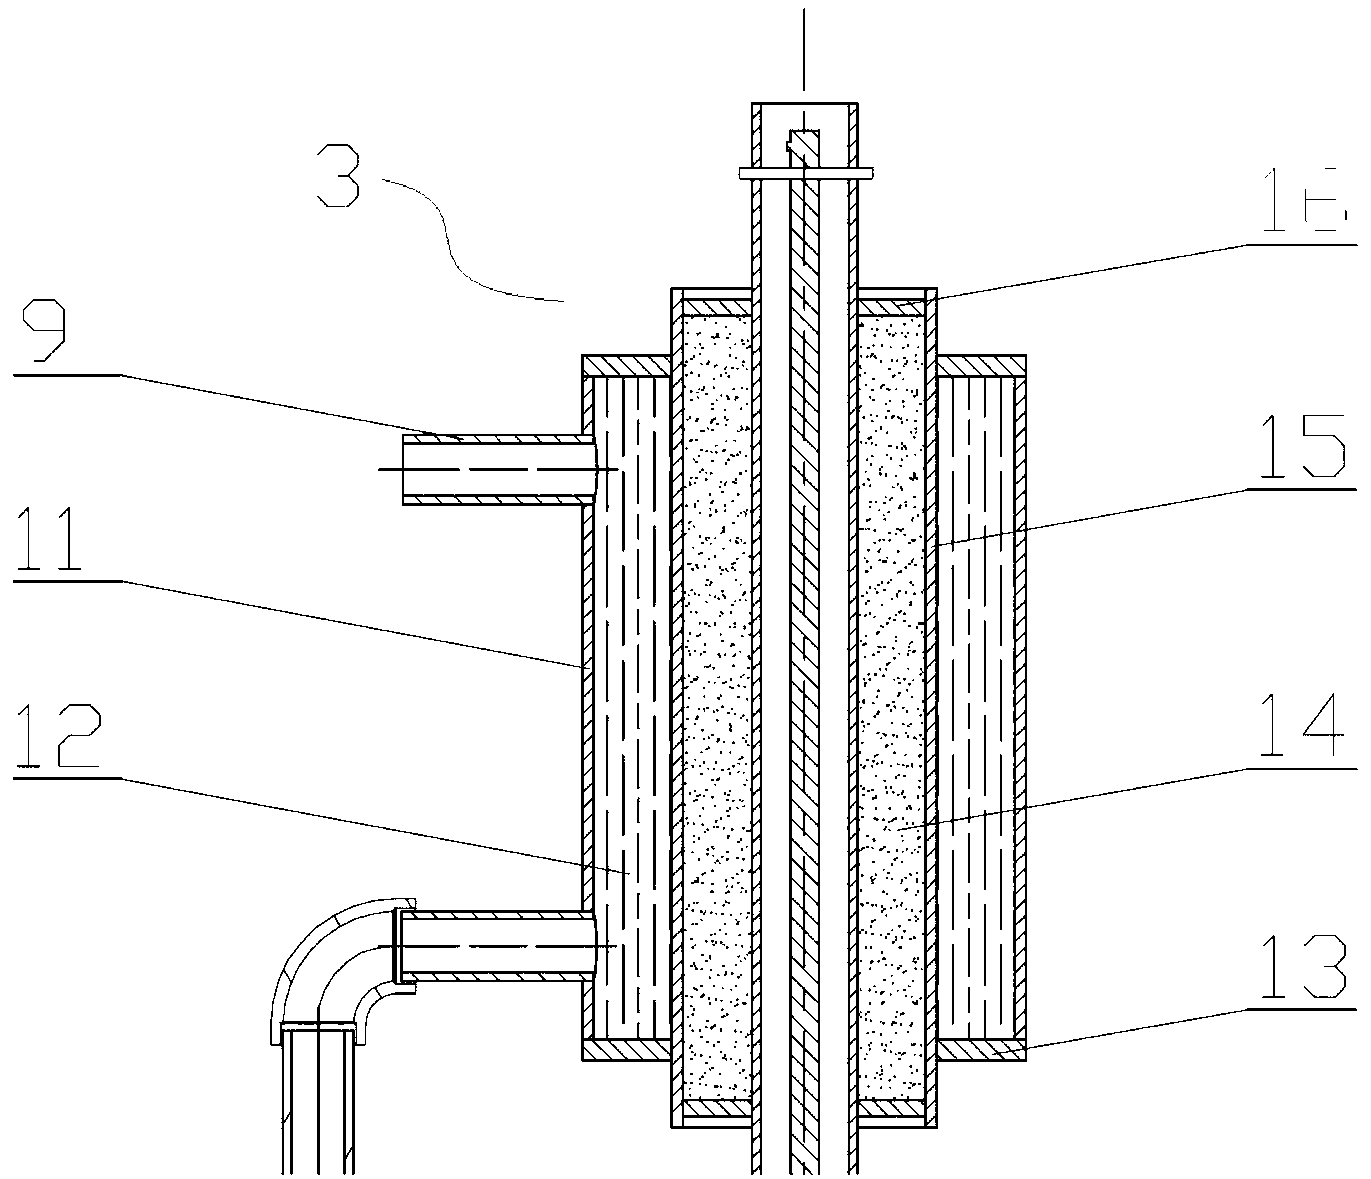 Sleeve type helium temperature-control sediment sampling device applied to high-temperature gas cooled reactor